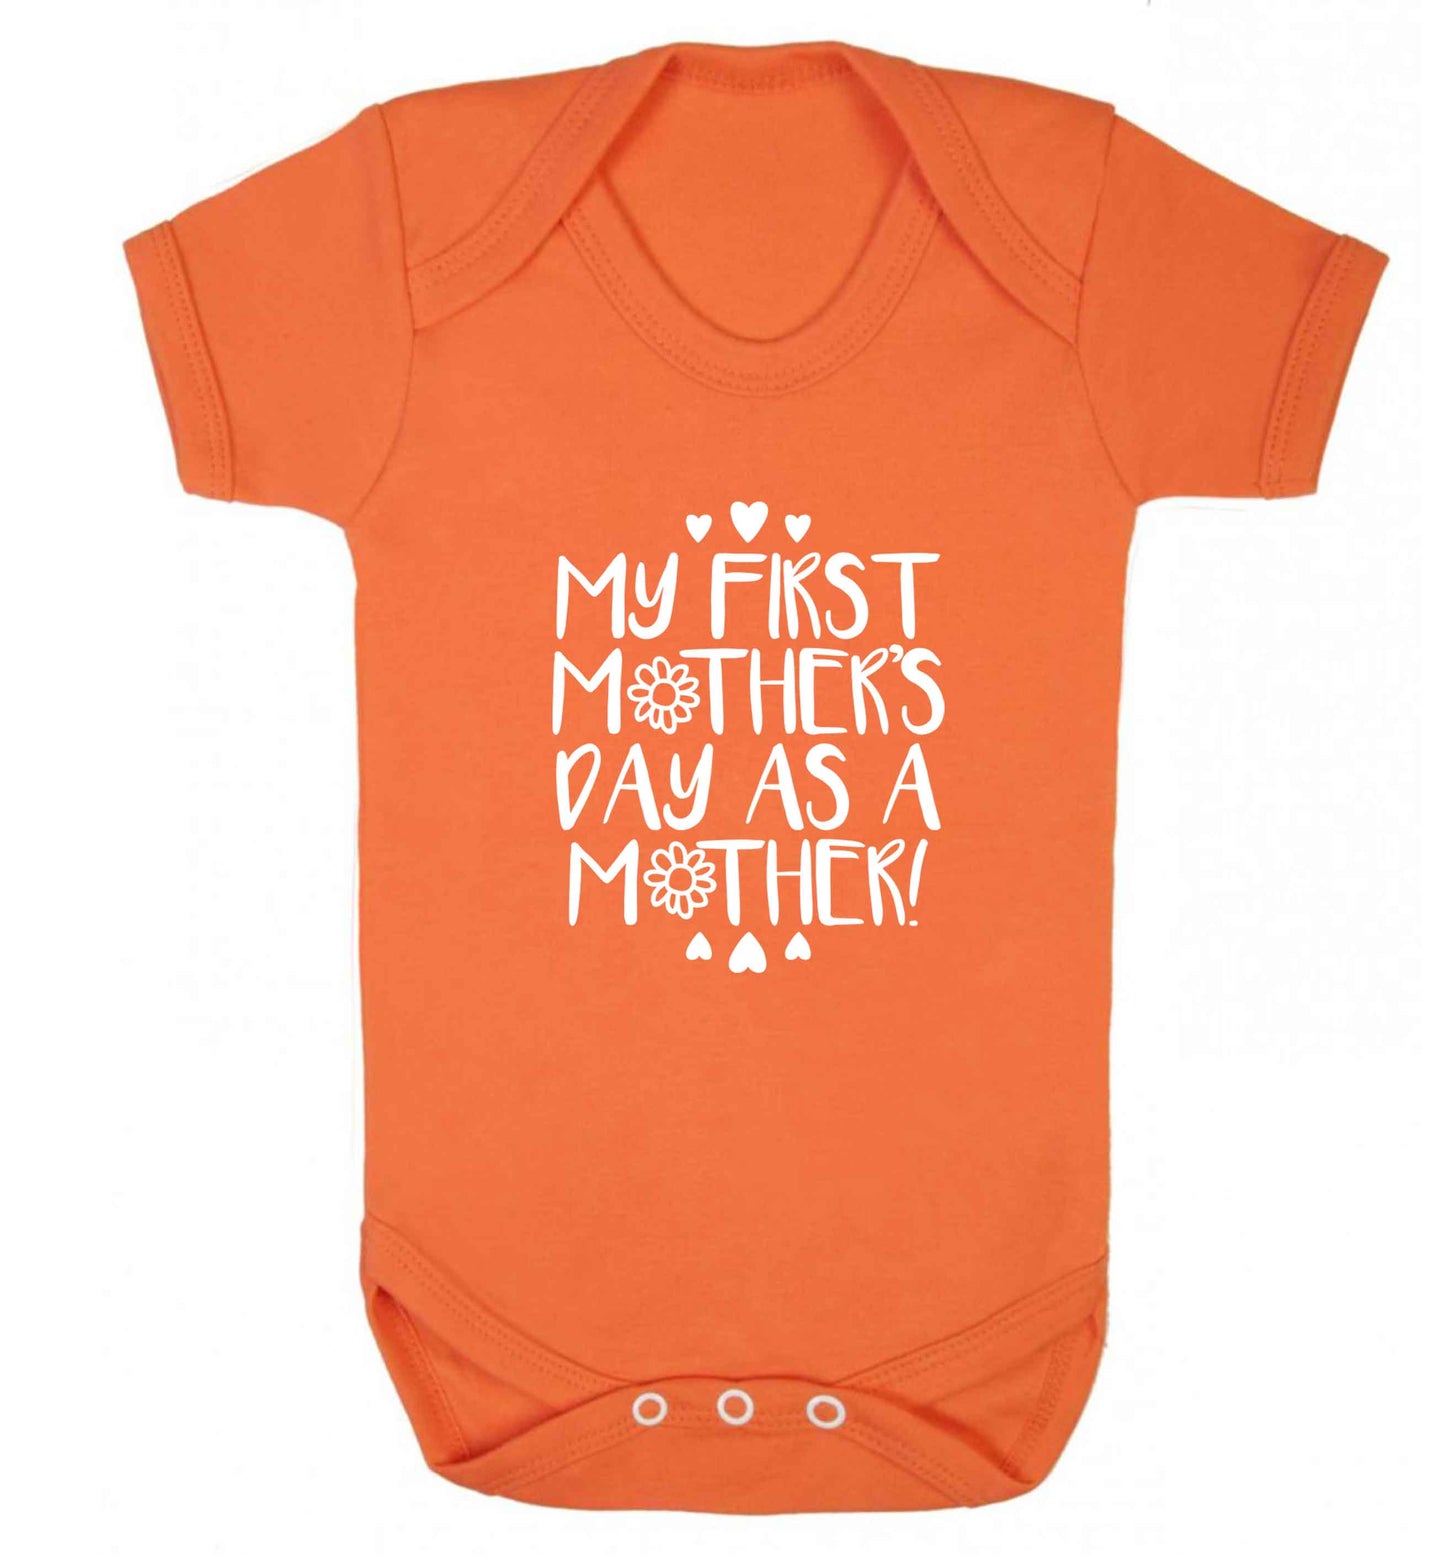 It's my first mother's day as a mother baby vest orange 18-24 months